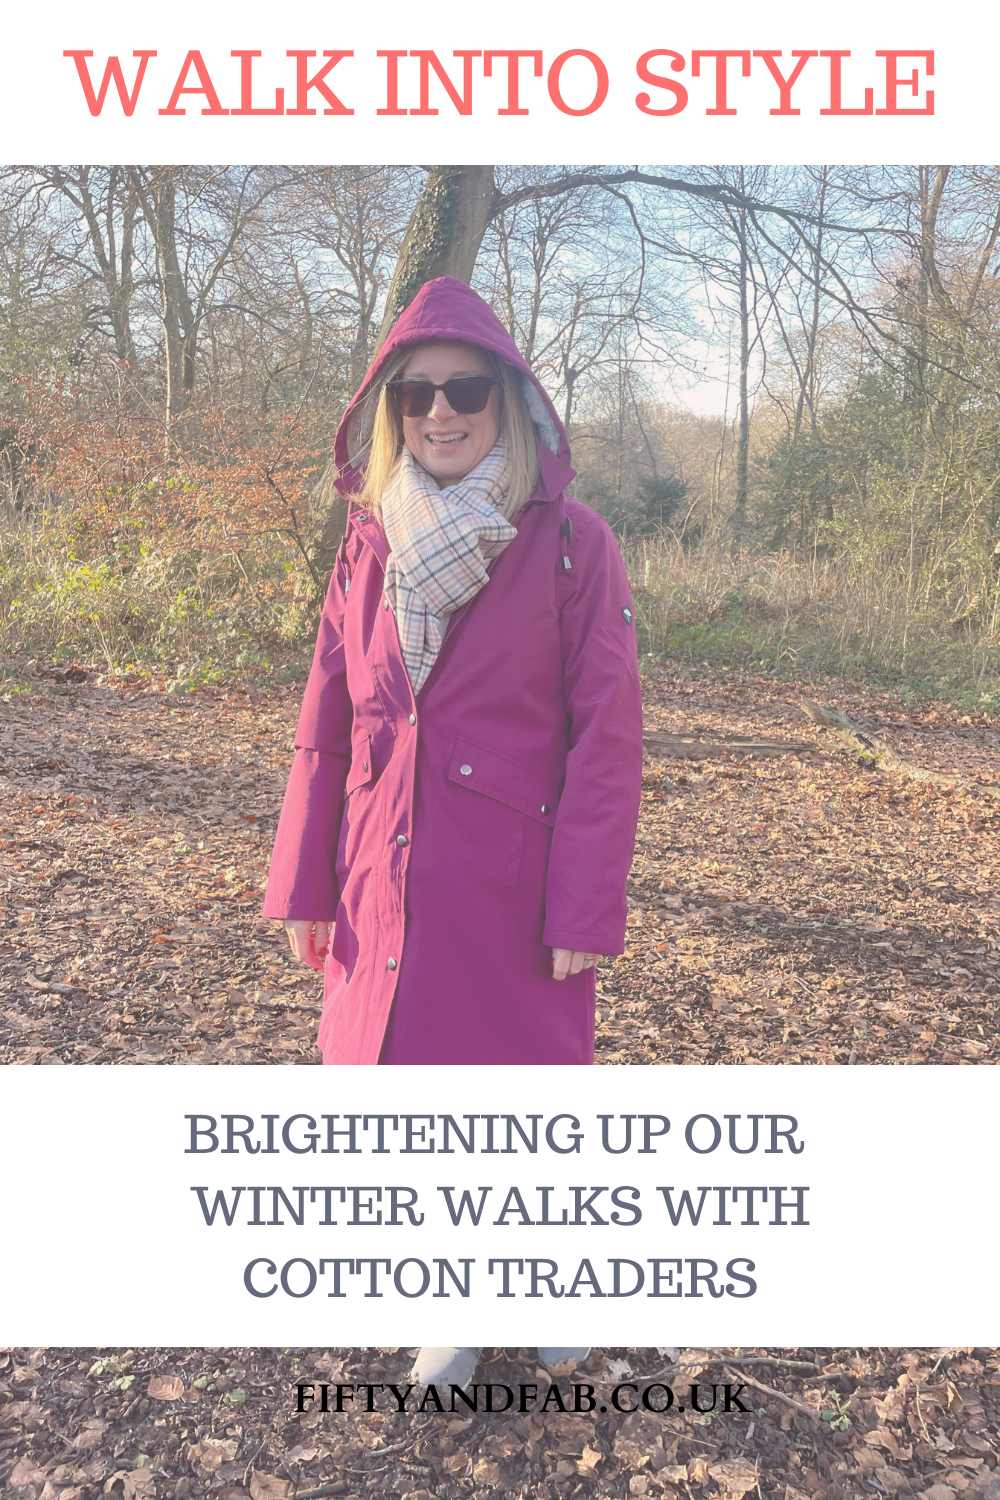 Pinterest | brightening up our winter walks with cotton traders